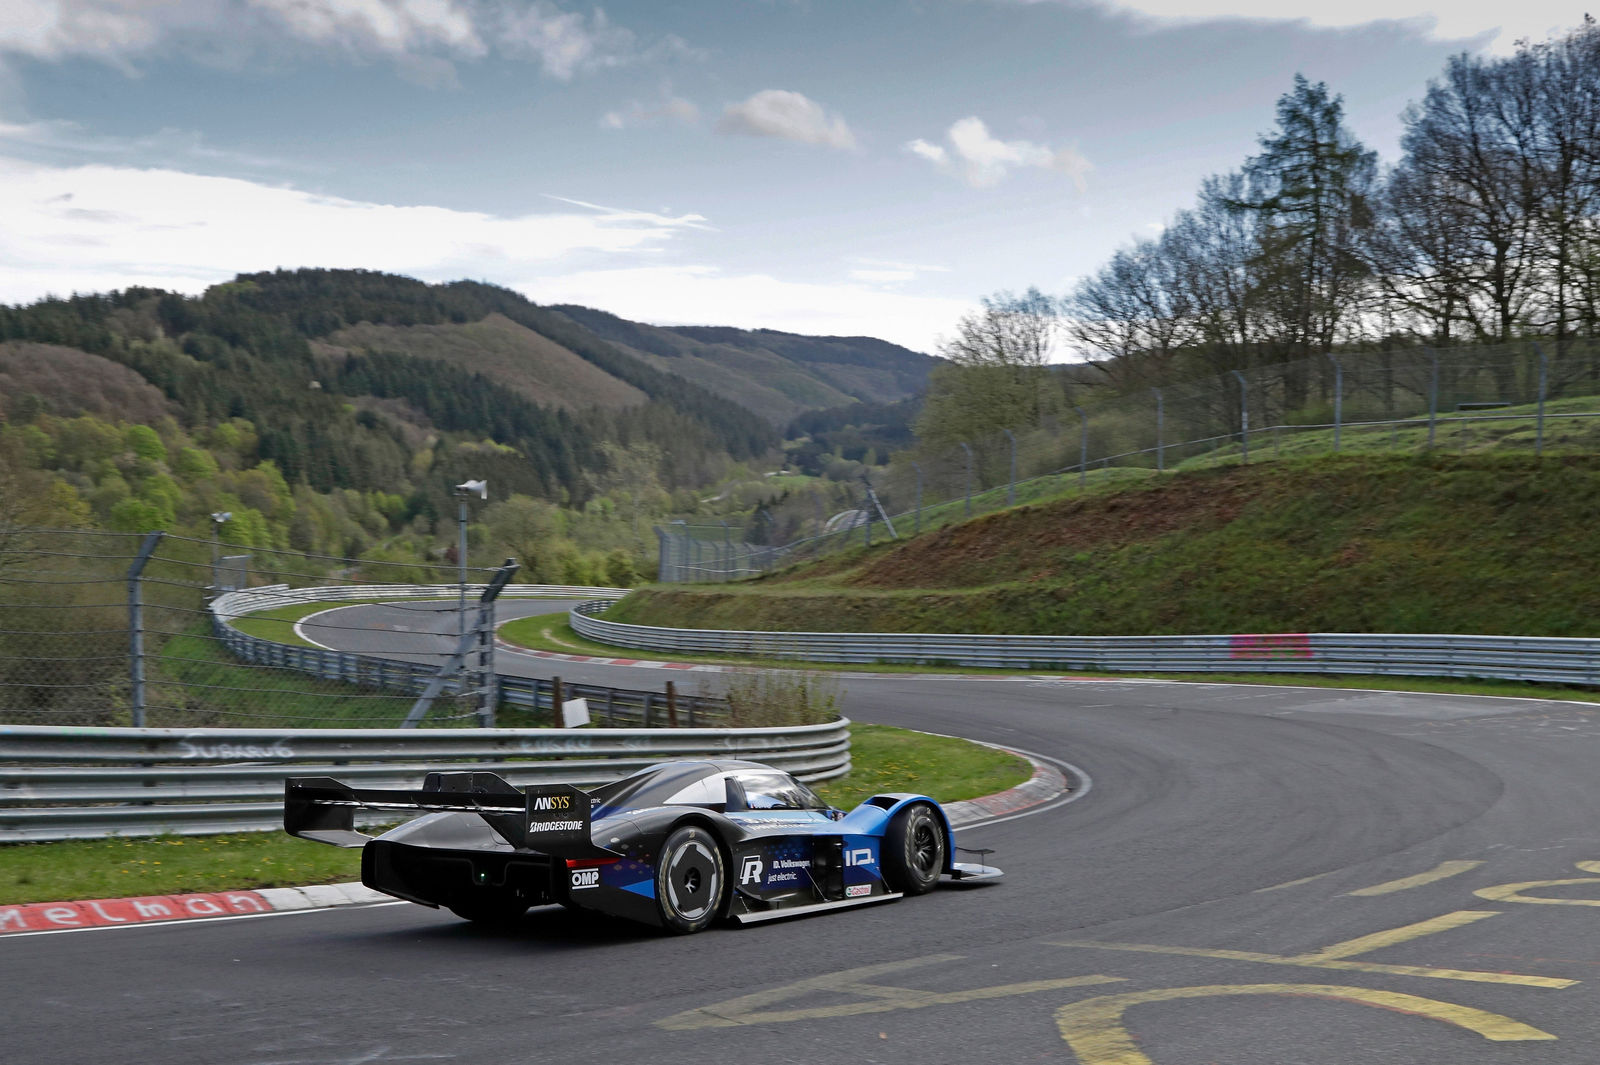 Volkswagen ID. R completes its first test on the Nordschleife